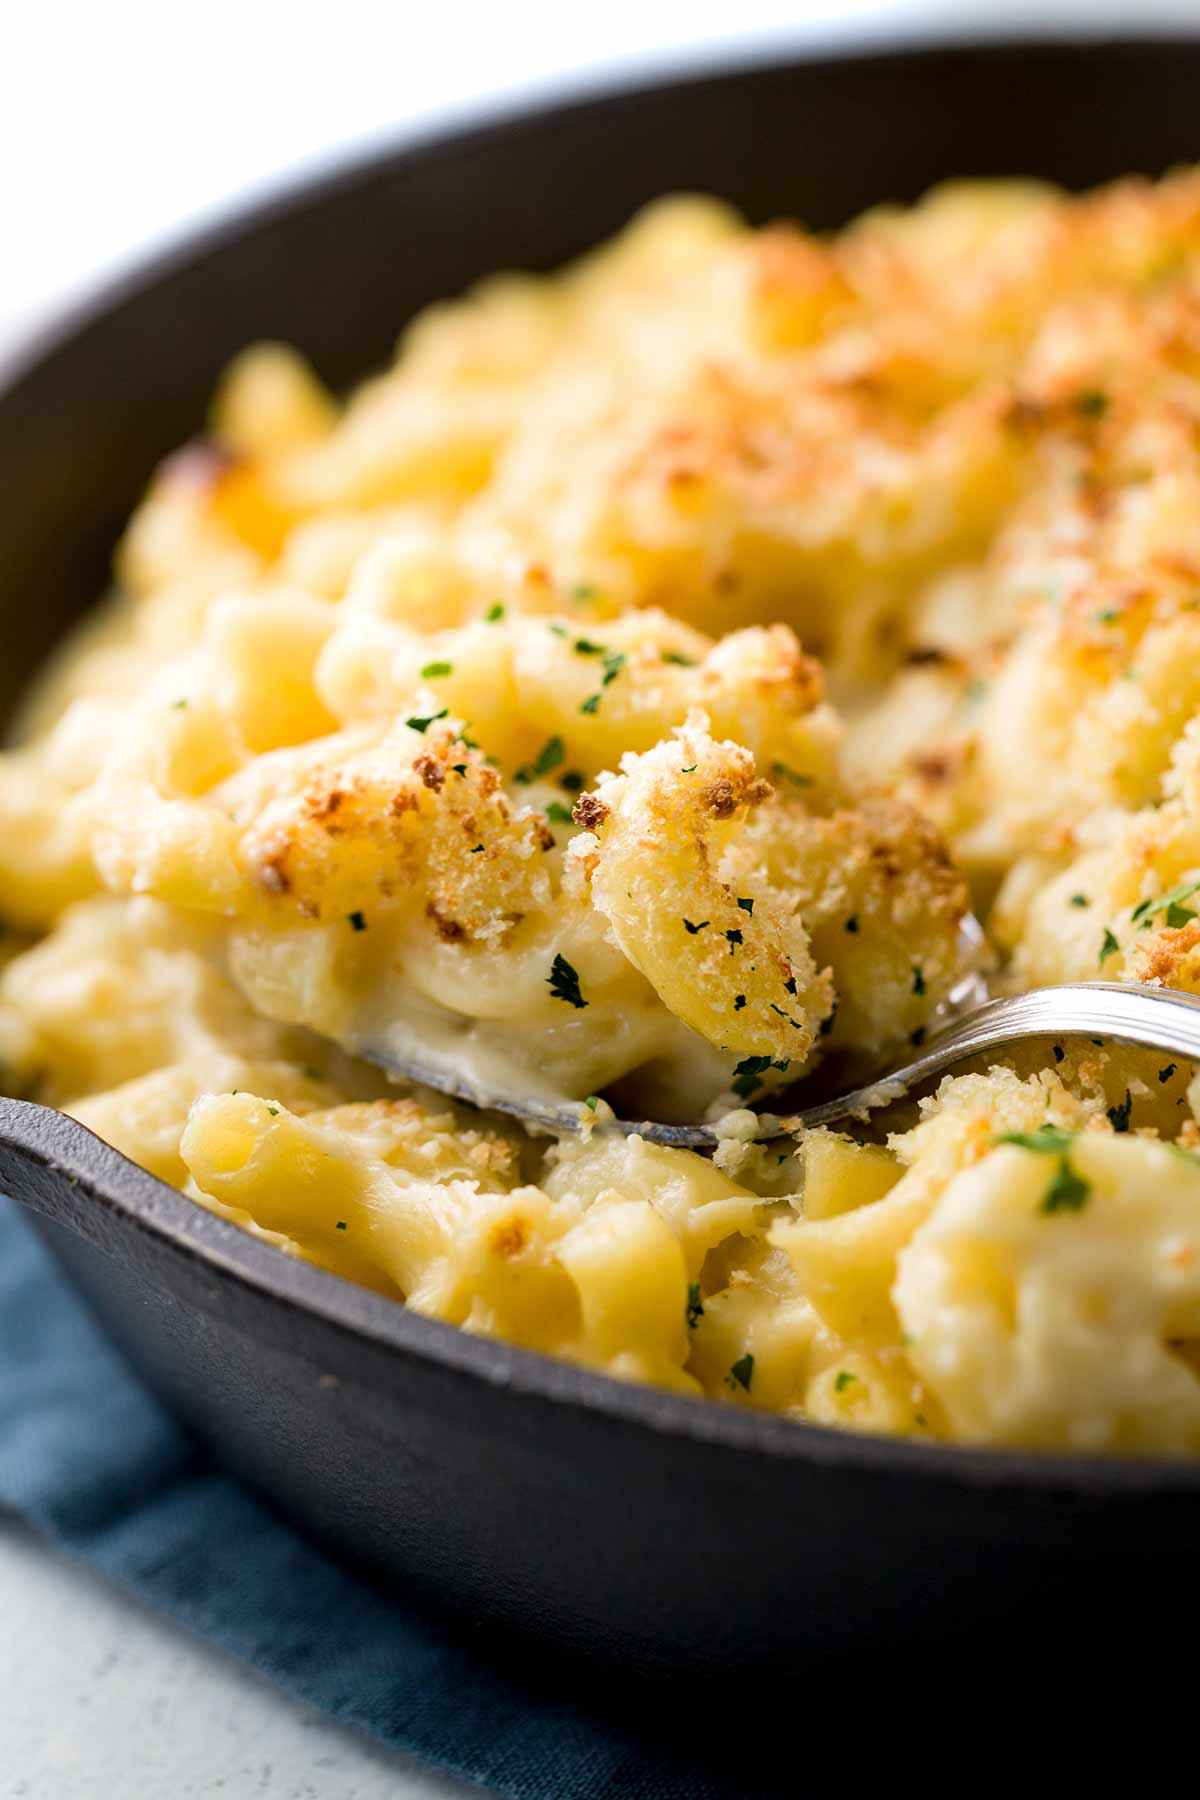 Make Baked Macaroni And Cheese
 Baked Macaroni and Cheese with Bread Crumb Topping